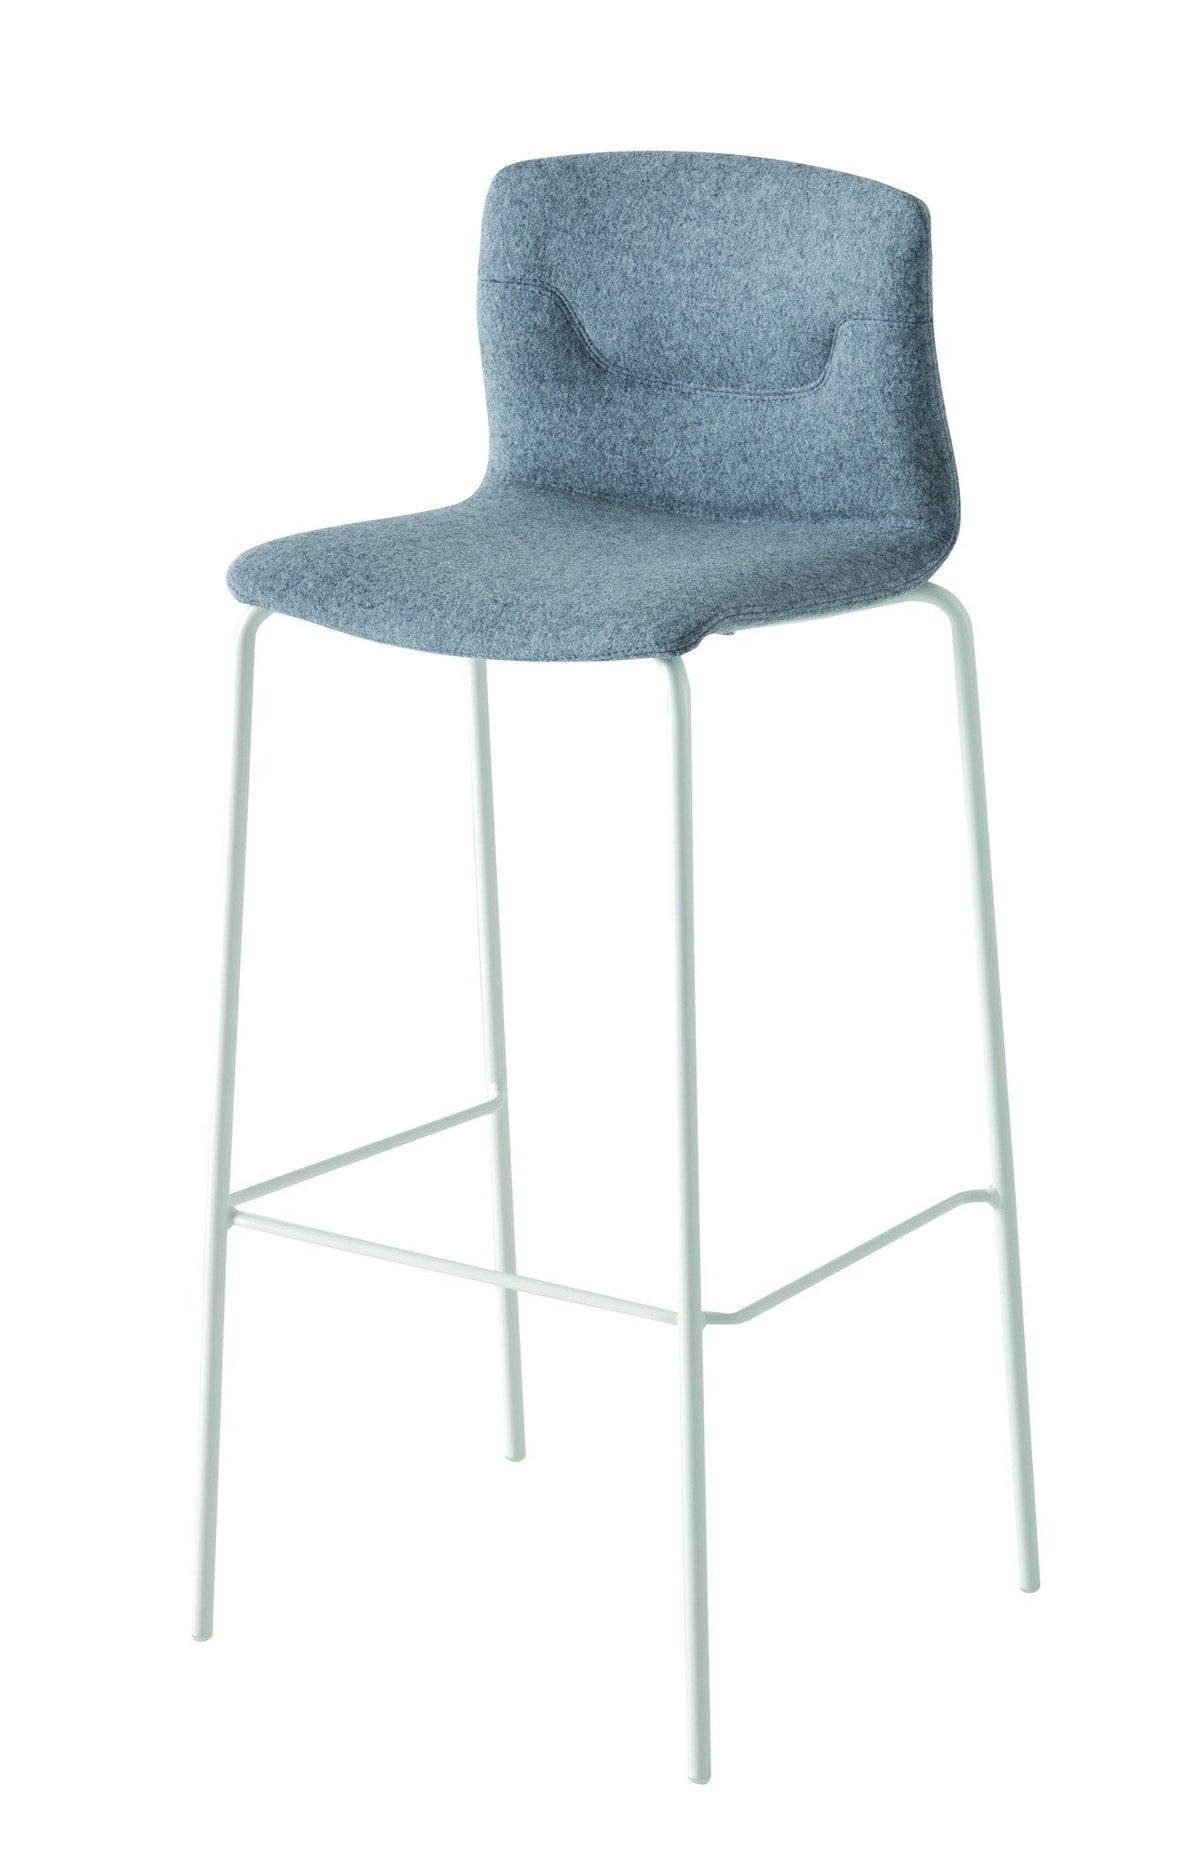 Slot High Stool c/w Metal Legs-Gaber-Contract Furniture Store